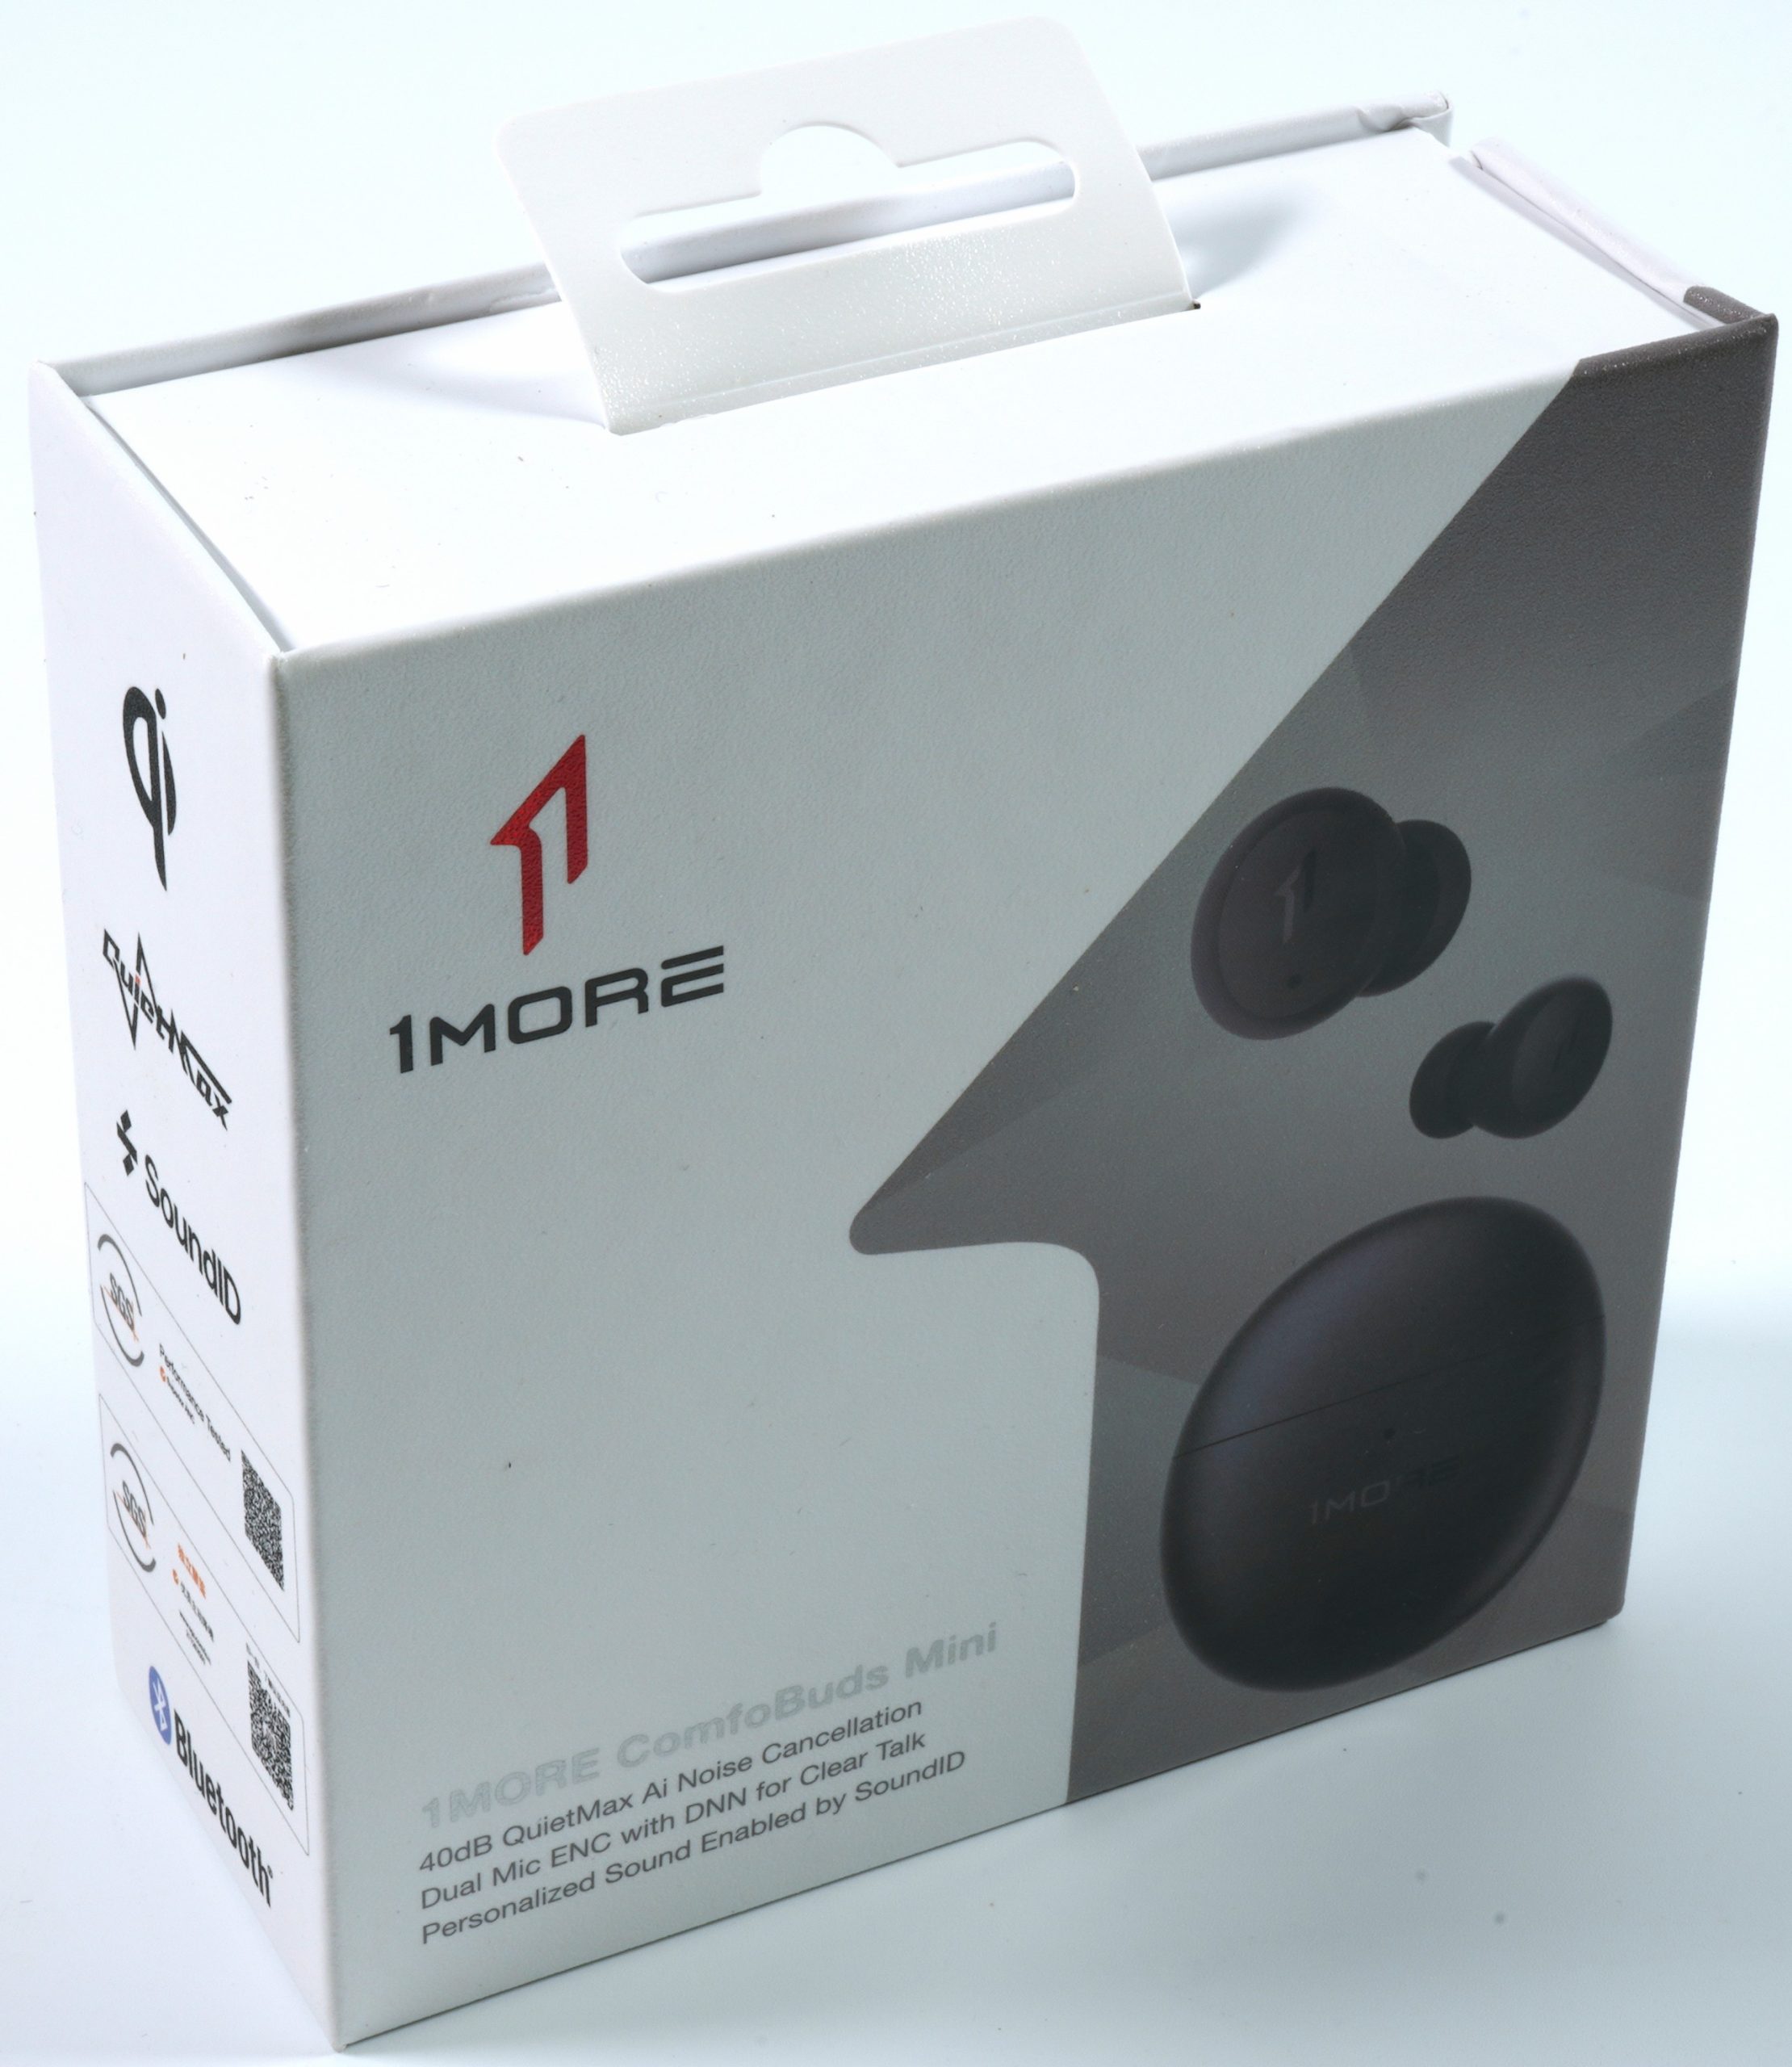 1More Comfobuds Mini Review - When The Dwarfs Drum Reservedly And The Measurements Confirm The Hearing Impression | Igor´slab